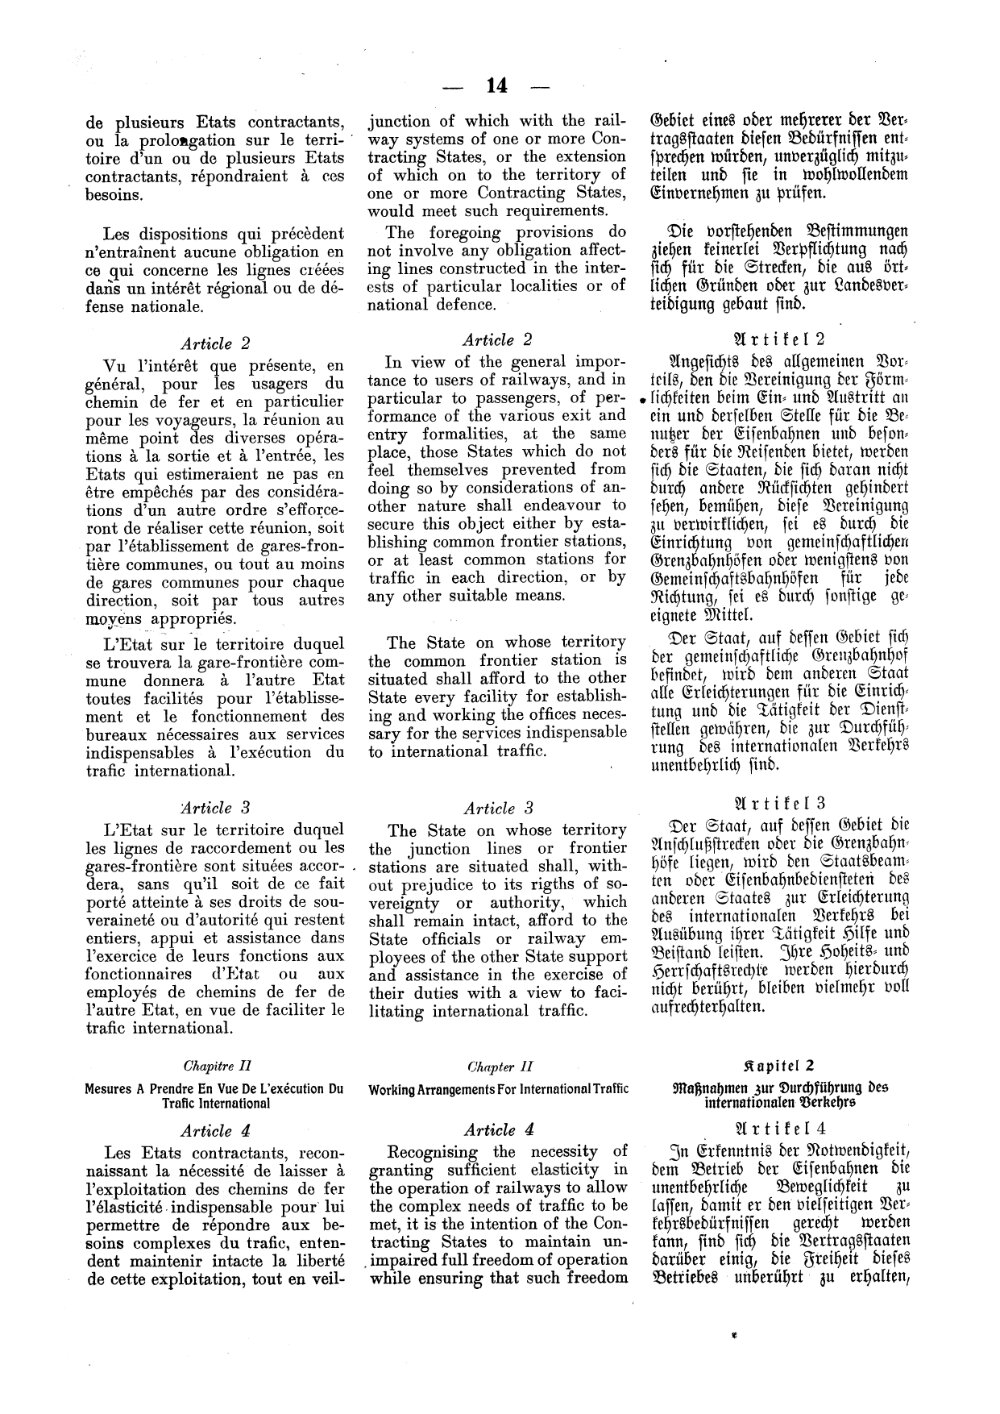 Scan of page 14